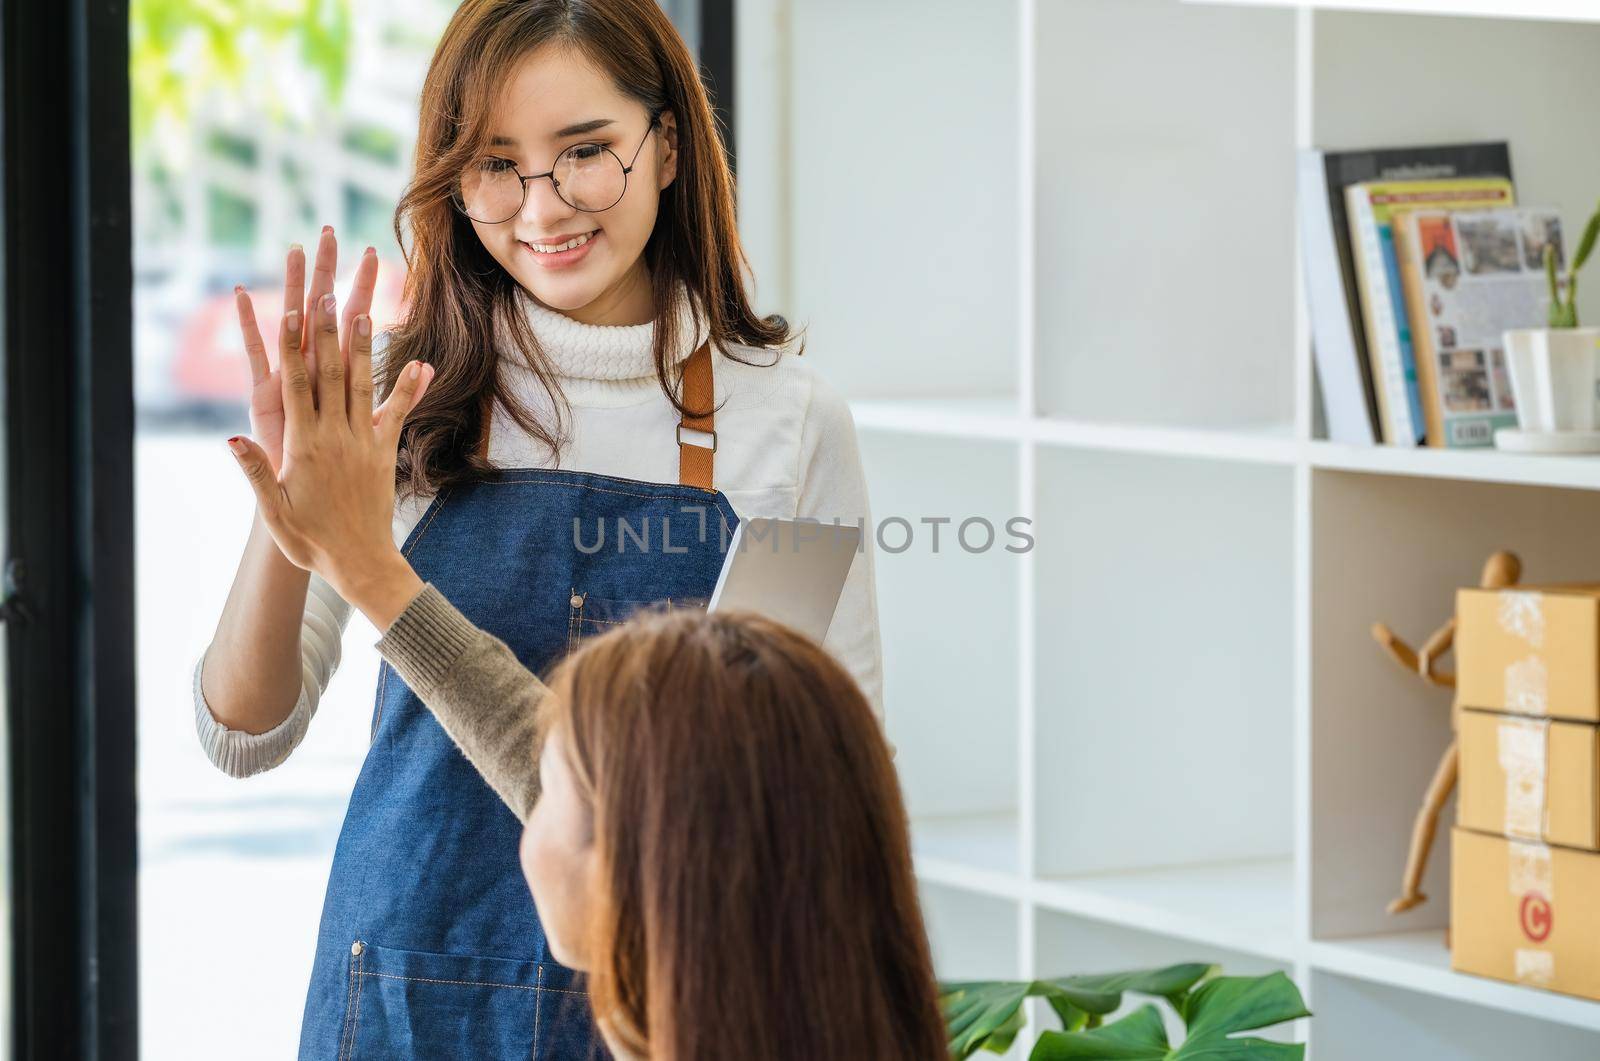 Sell products to business owners online. Focus on the face of a woman in white expressing joy to a friend whose online sales exceeded their expectations